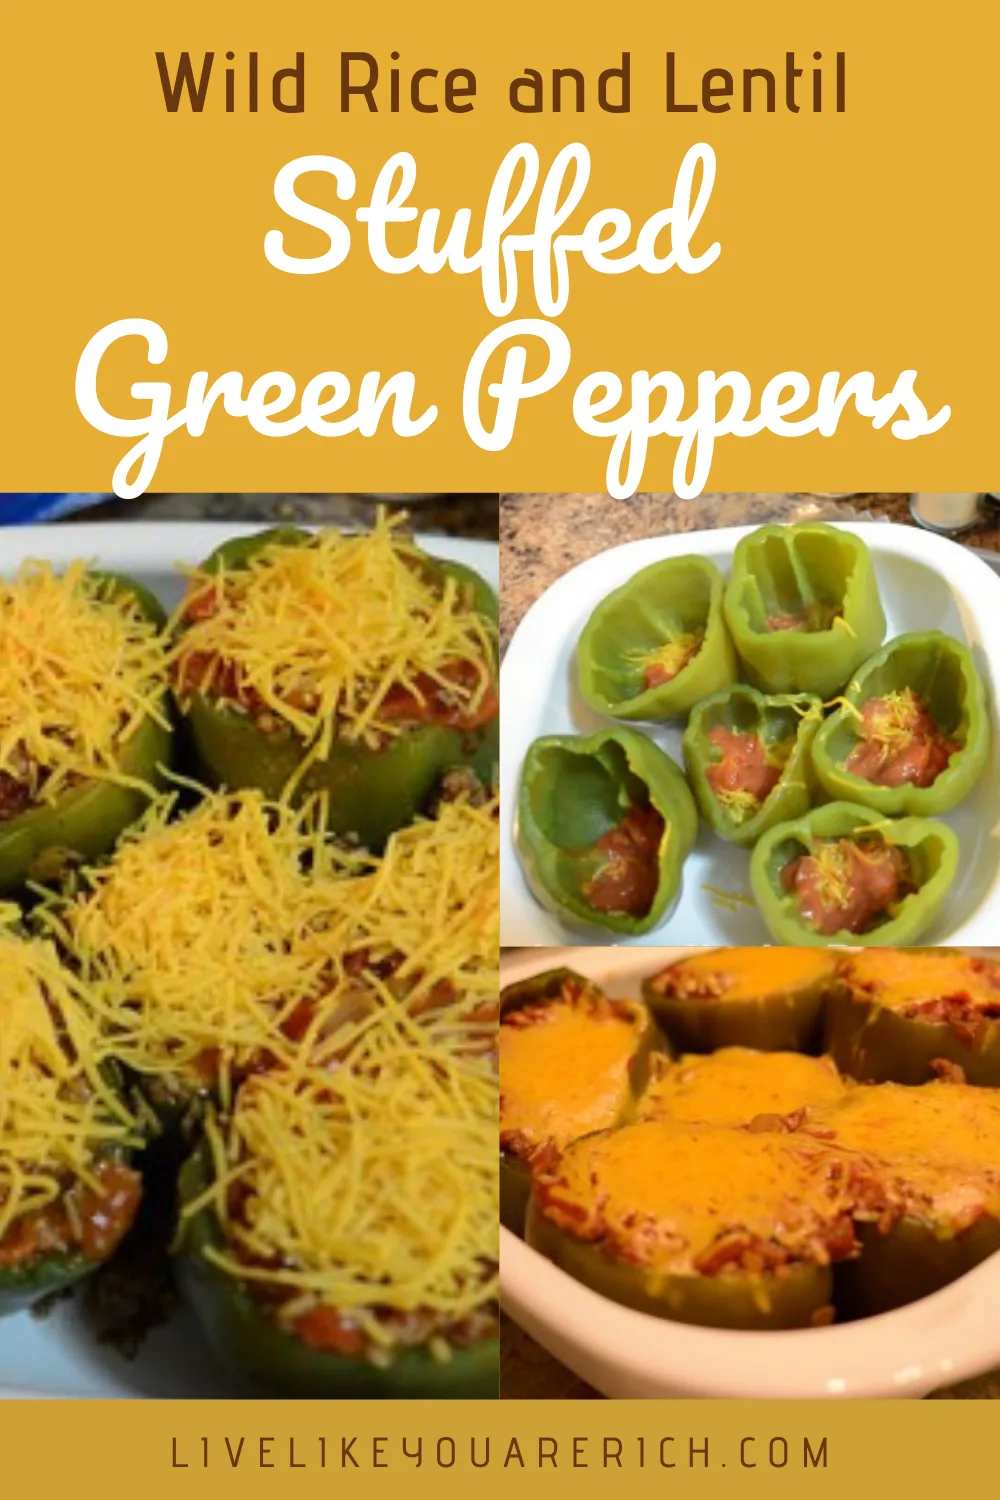 Looking for a great meal for dinner or anytime? Try this Wild Rice and Lentil Stuffed Green Peppers. Your family will love it as much as mine does! #wildriceandlentil #greenpeppers